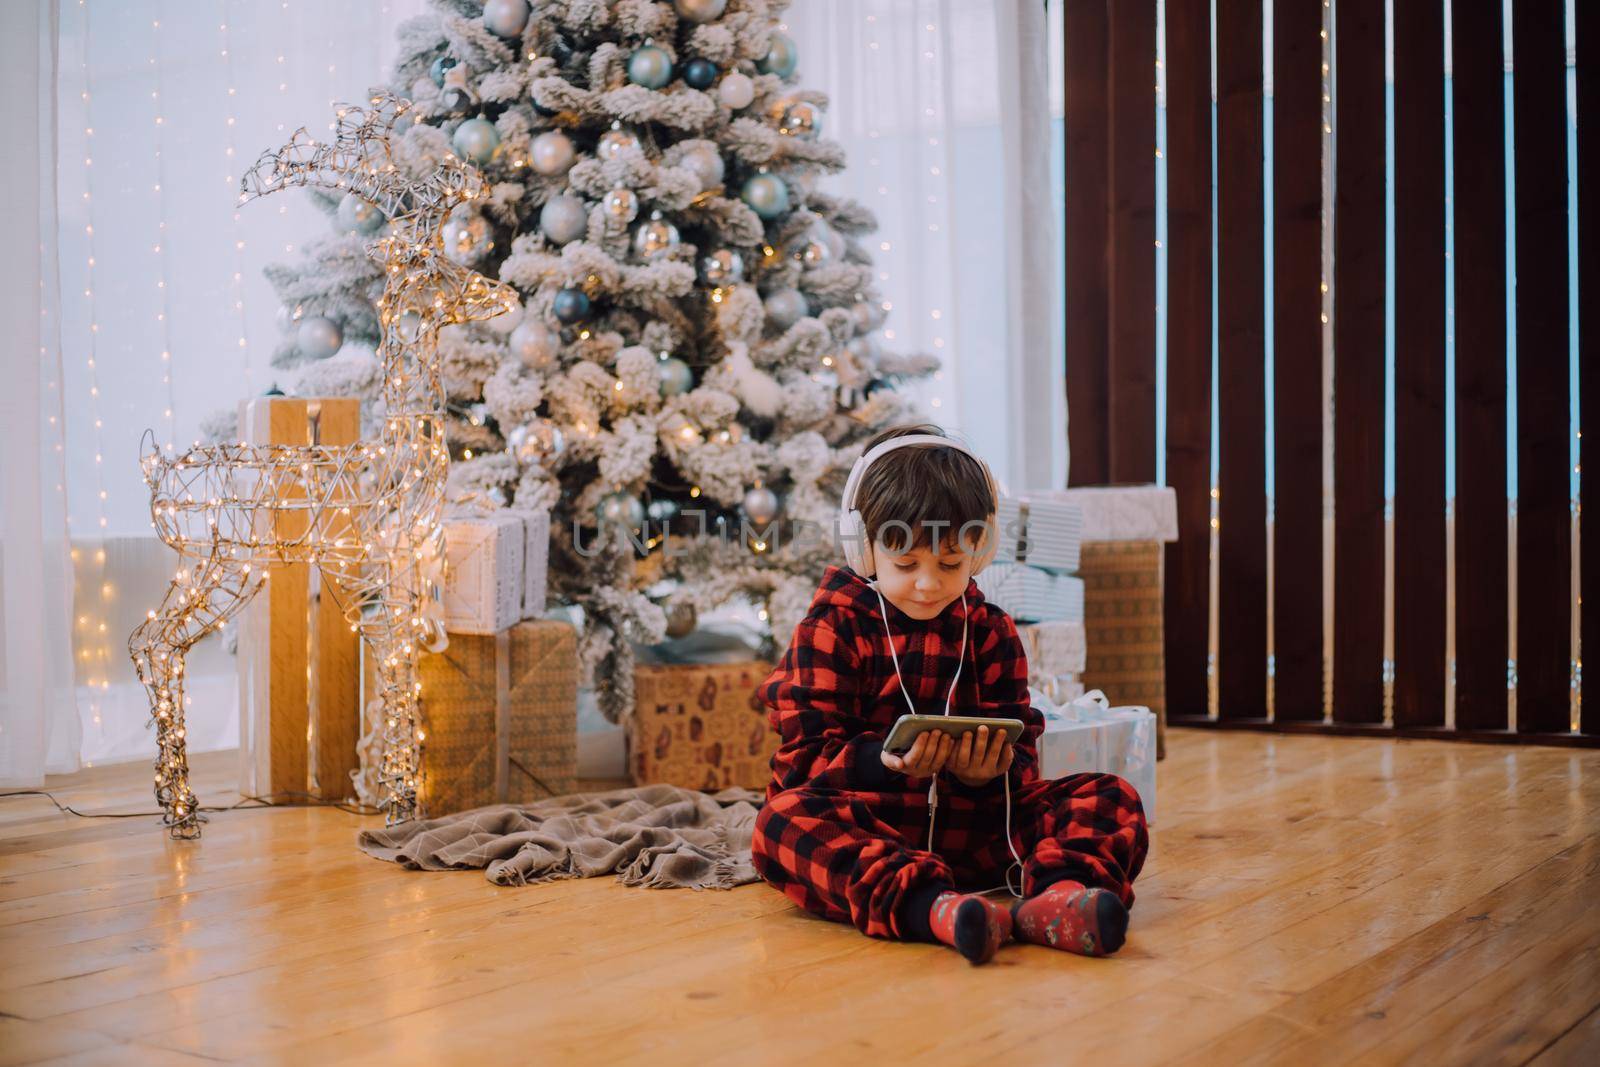 The boy with the phone under the Christmas tree lifestyle. New Year and Christmas. Festive decoration.